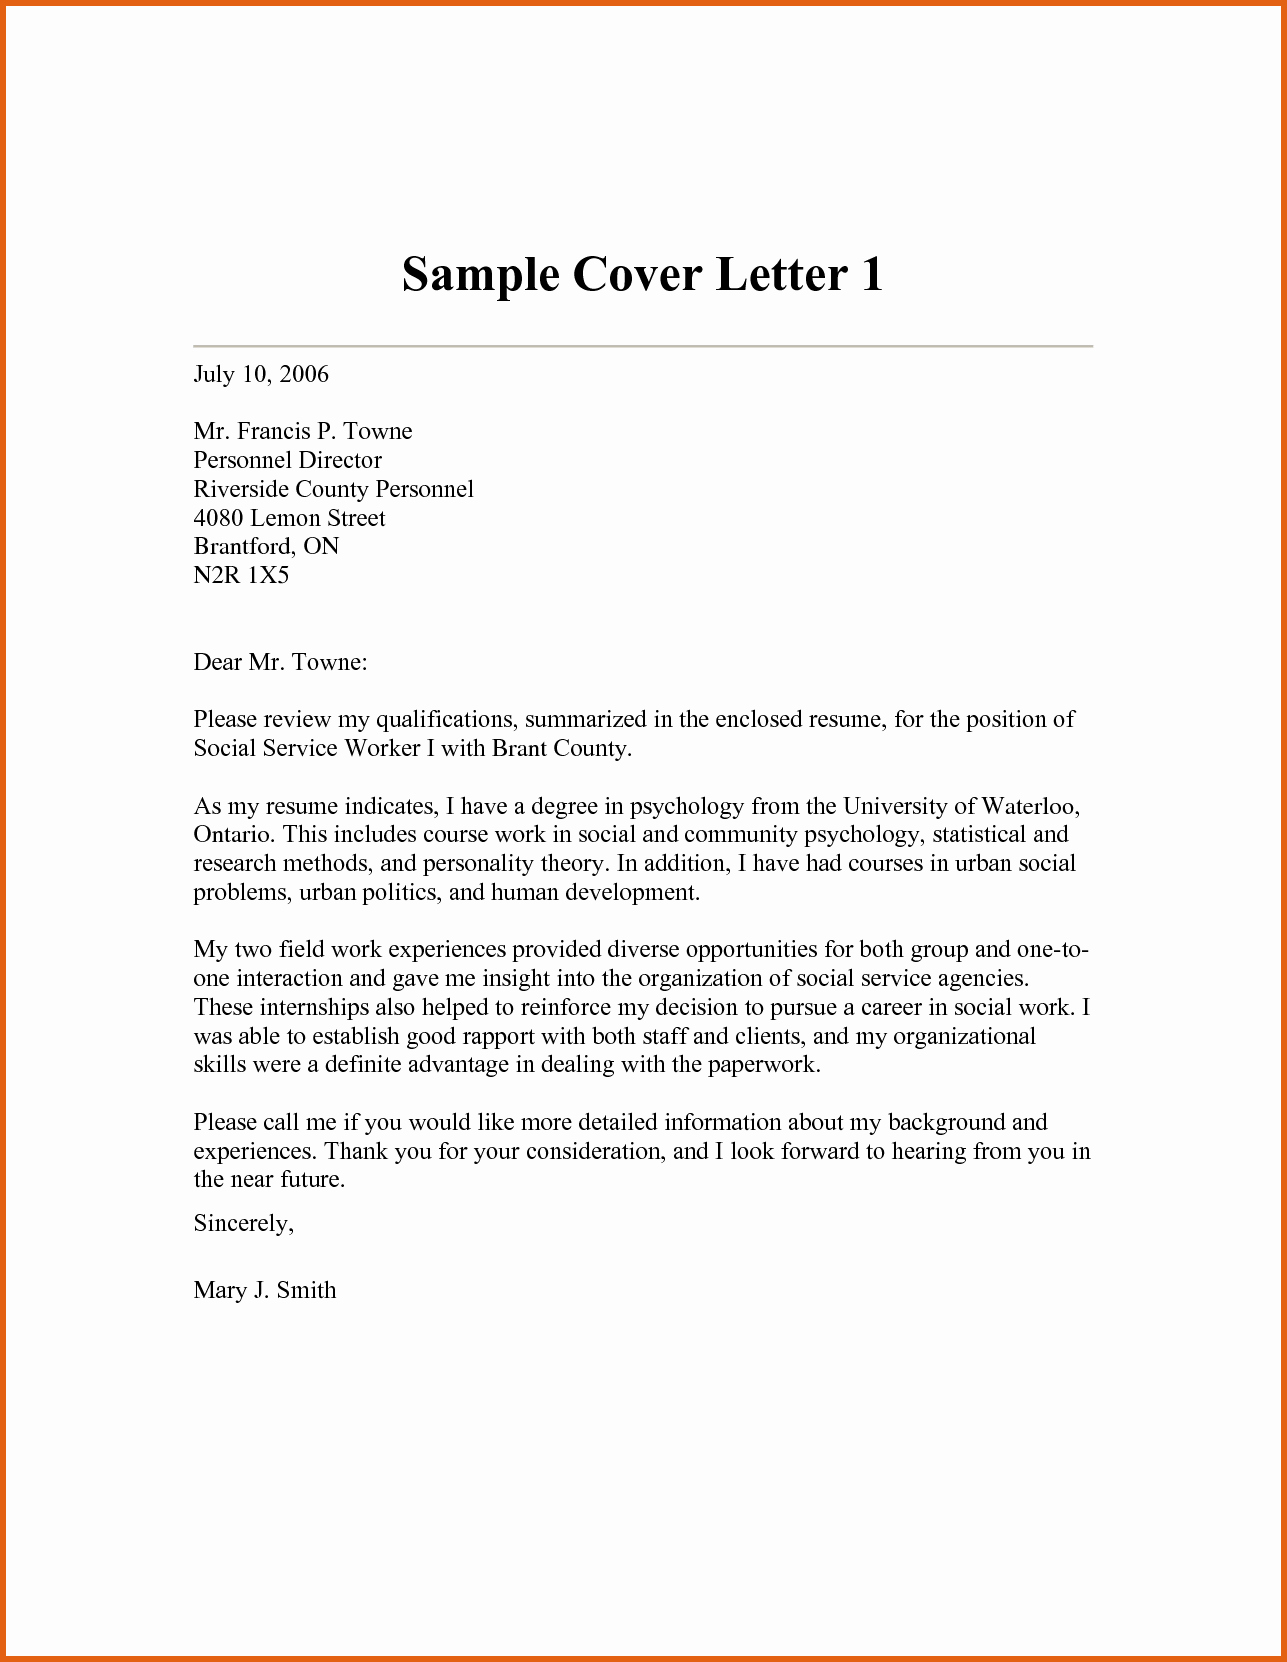 Sample Resume and Cover Letter Luxury social Work Cover Letters Templates Cover Letter Samples